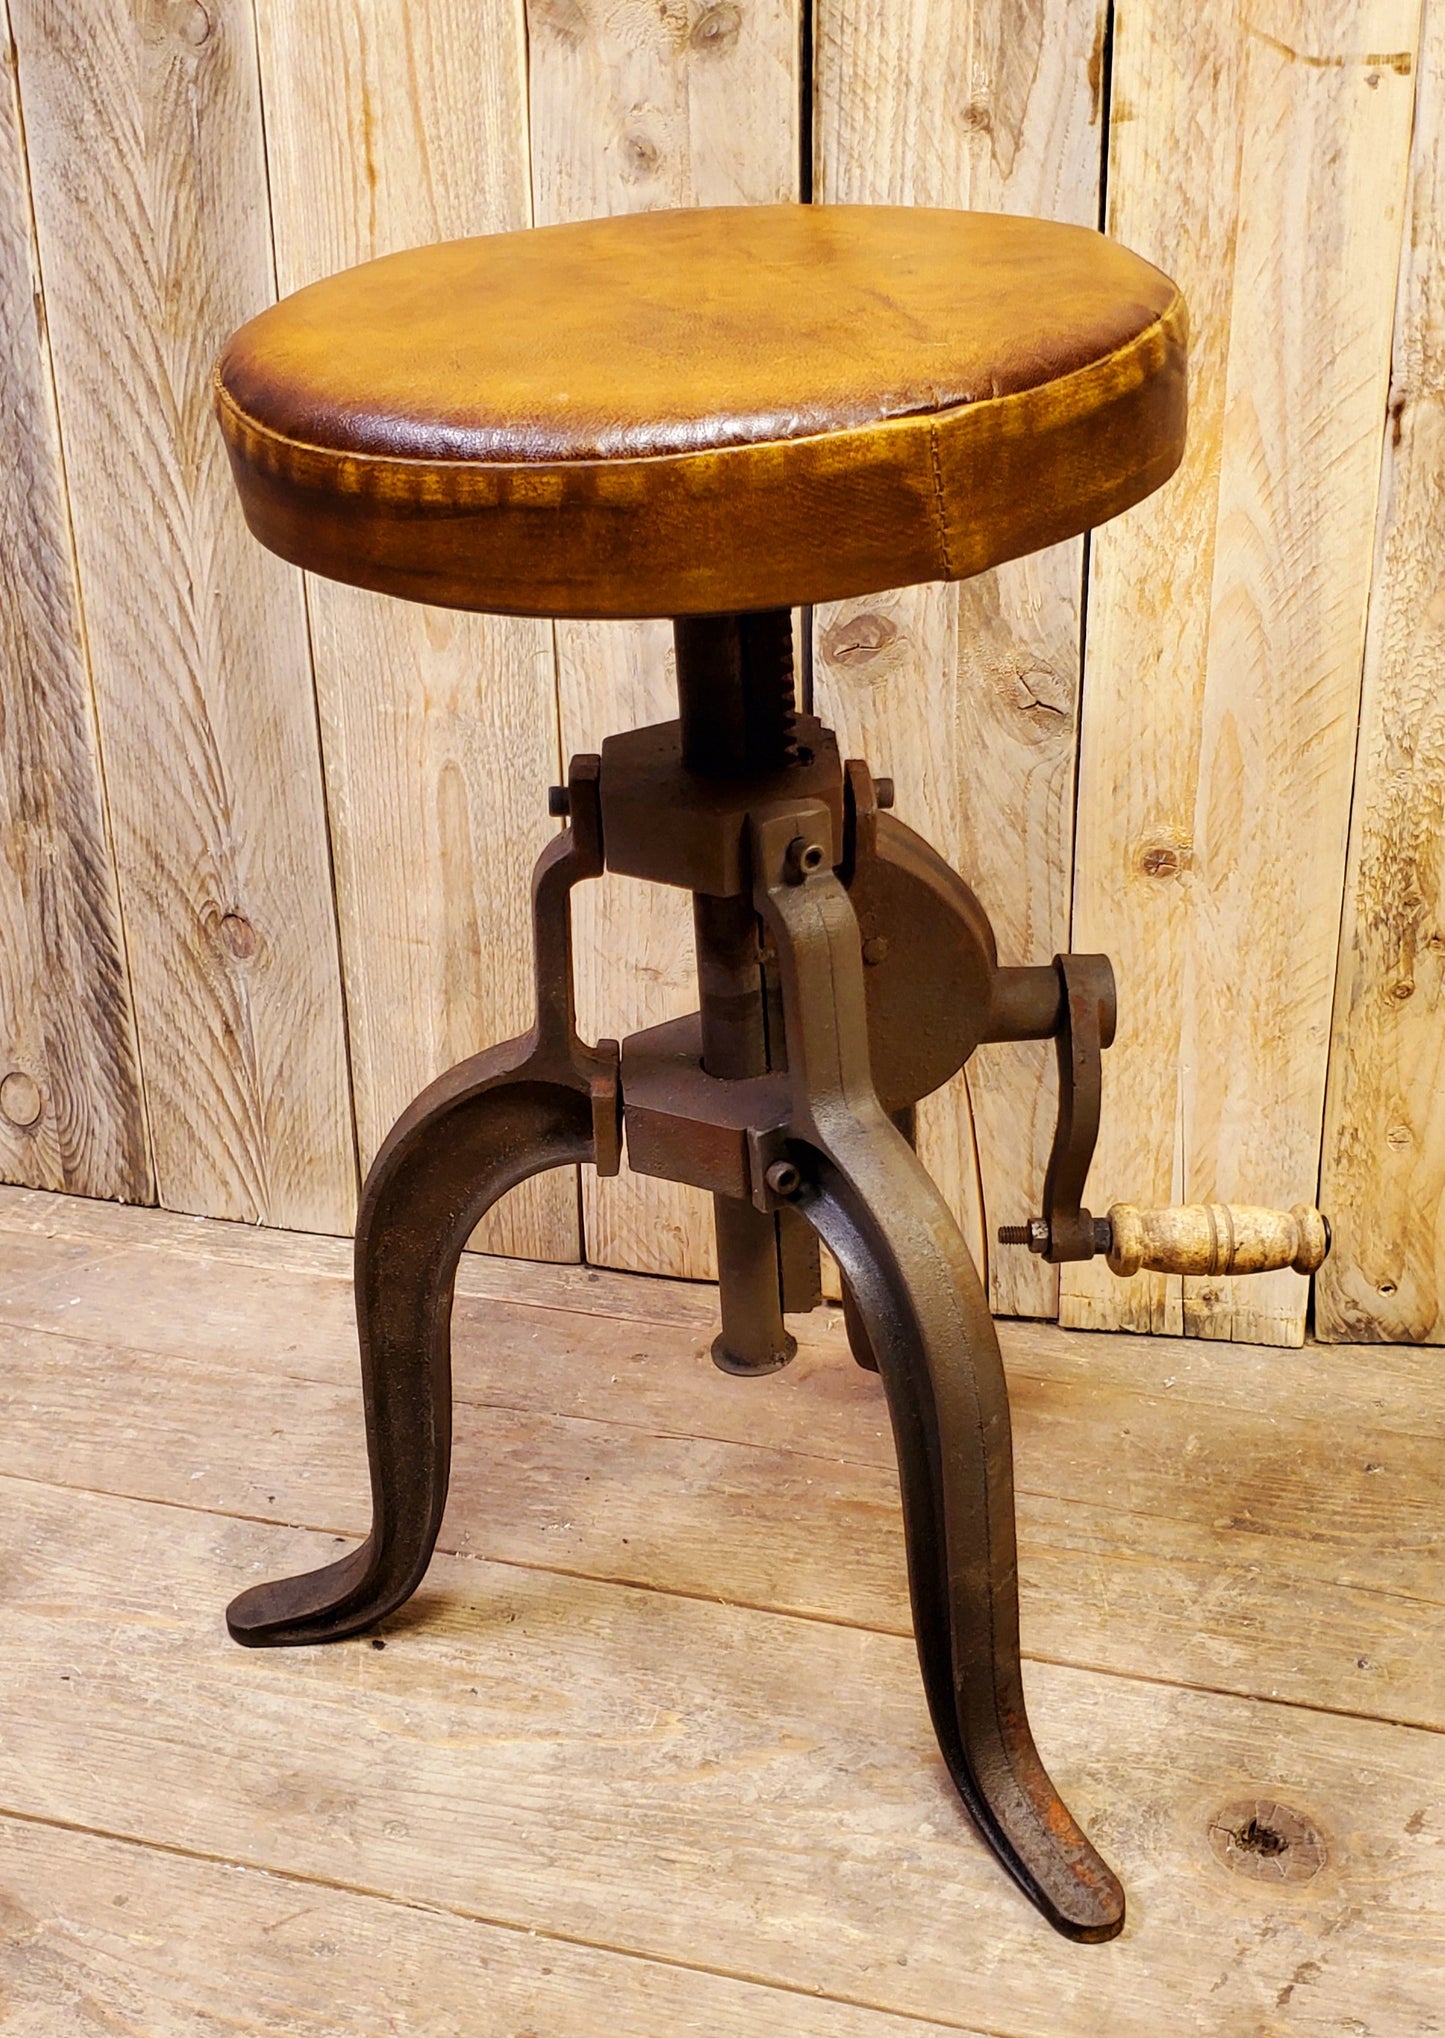 The Abercrombie - Vintage Cast Iron Crank Handle Stool With Leather Seat Top